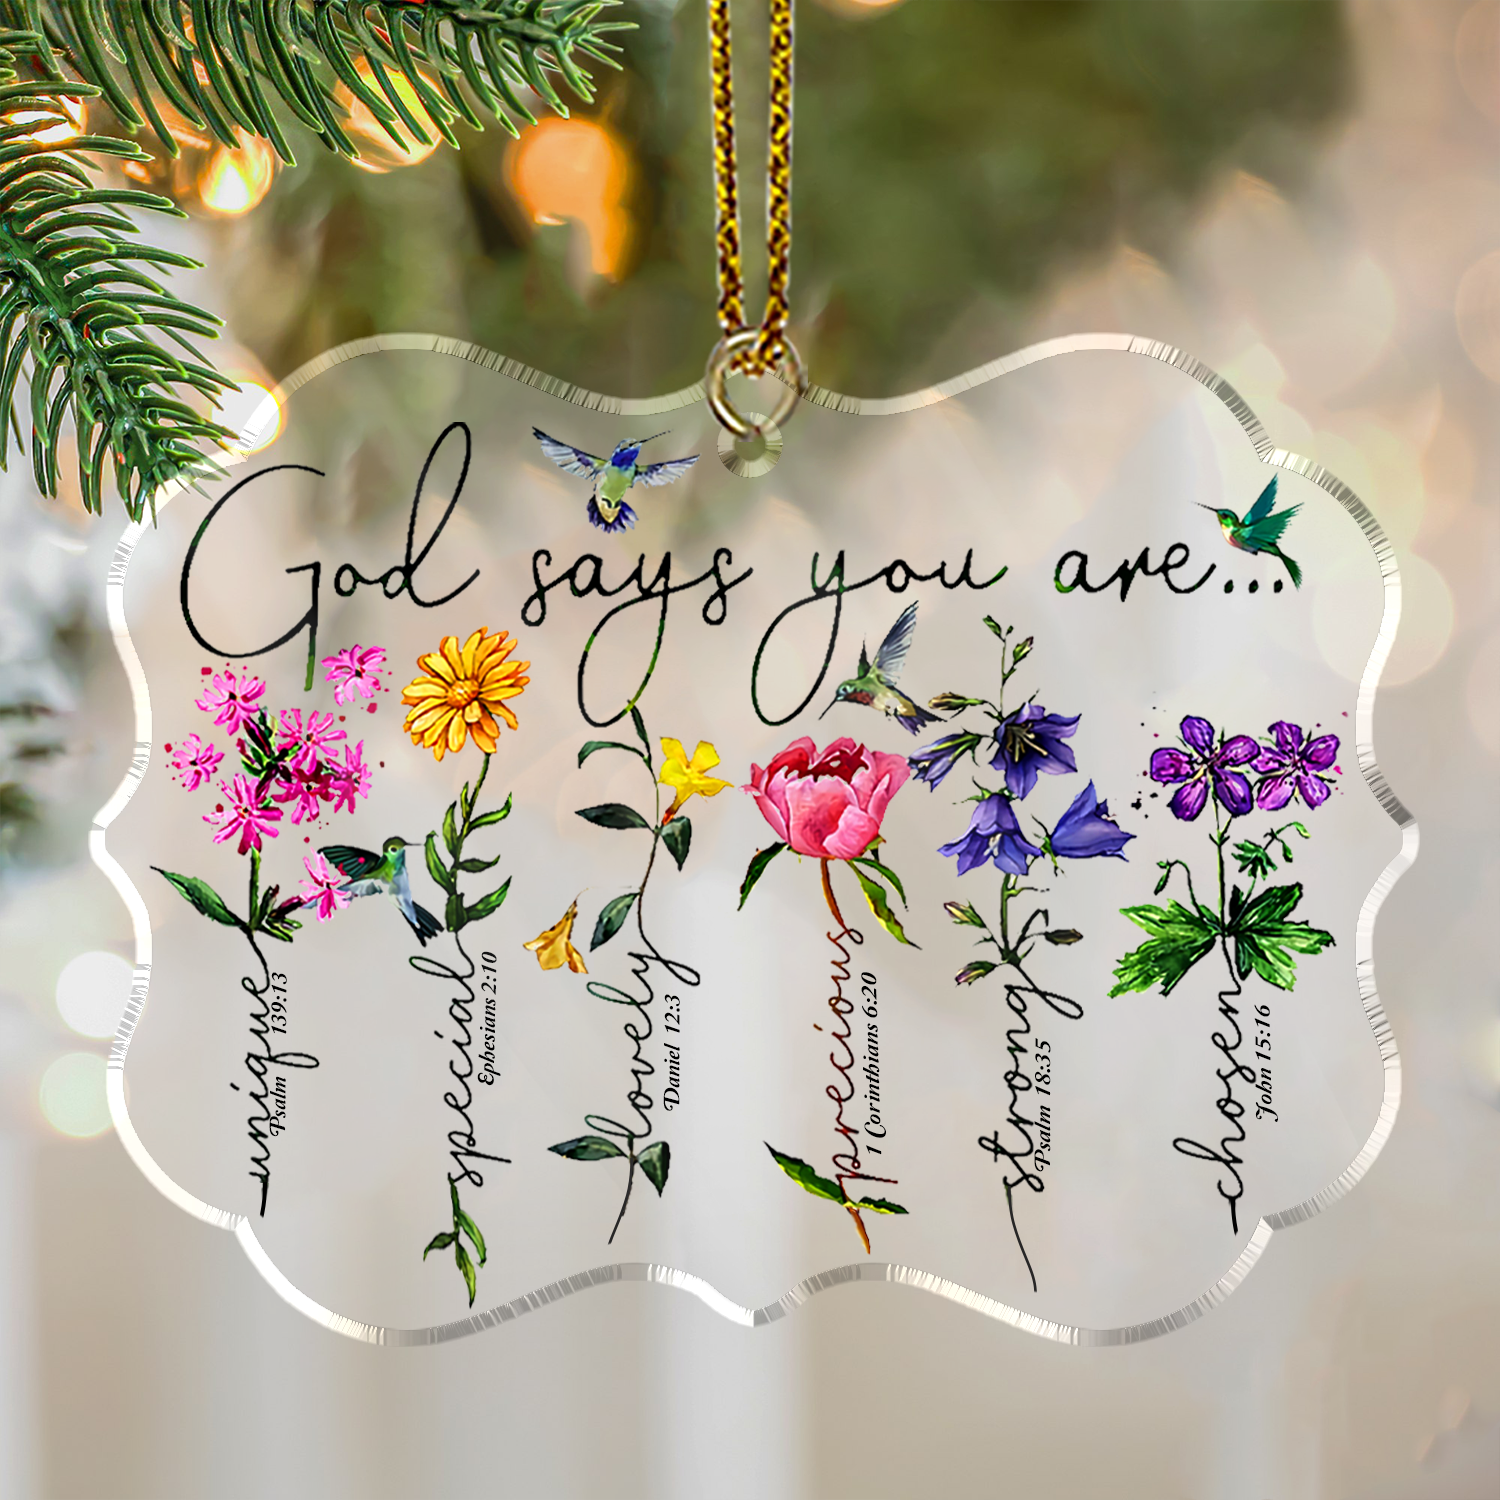 Jesus Acrylic Ornament - Christian Gift, Christmas Gift For Family Member, Friends - Hummingbird Flowers God Says You Are